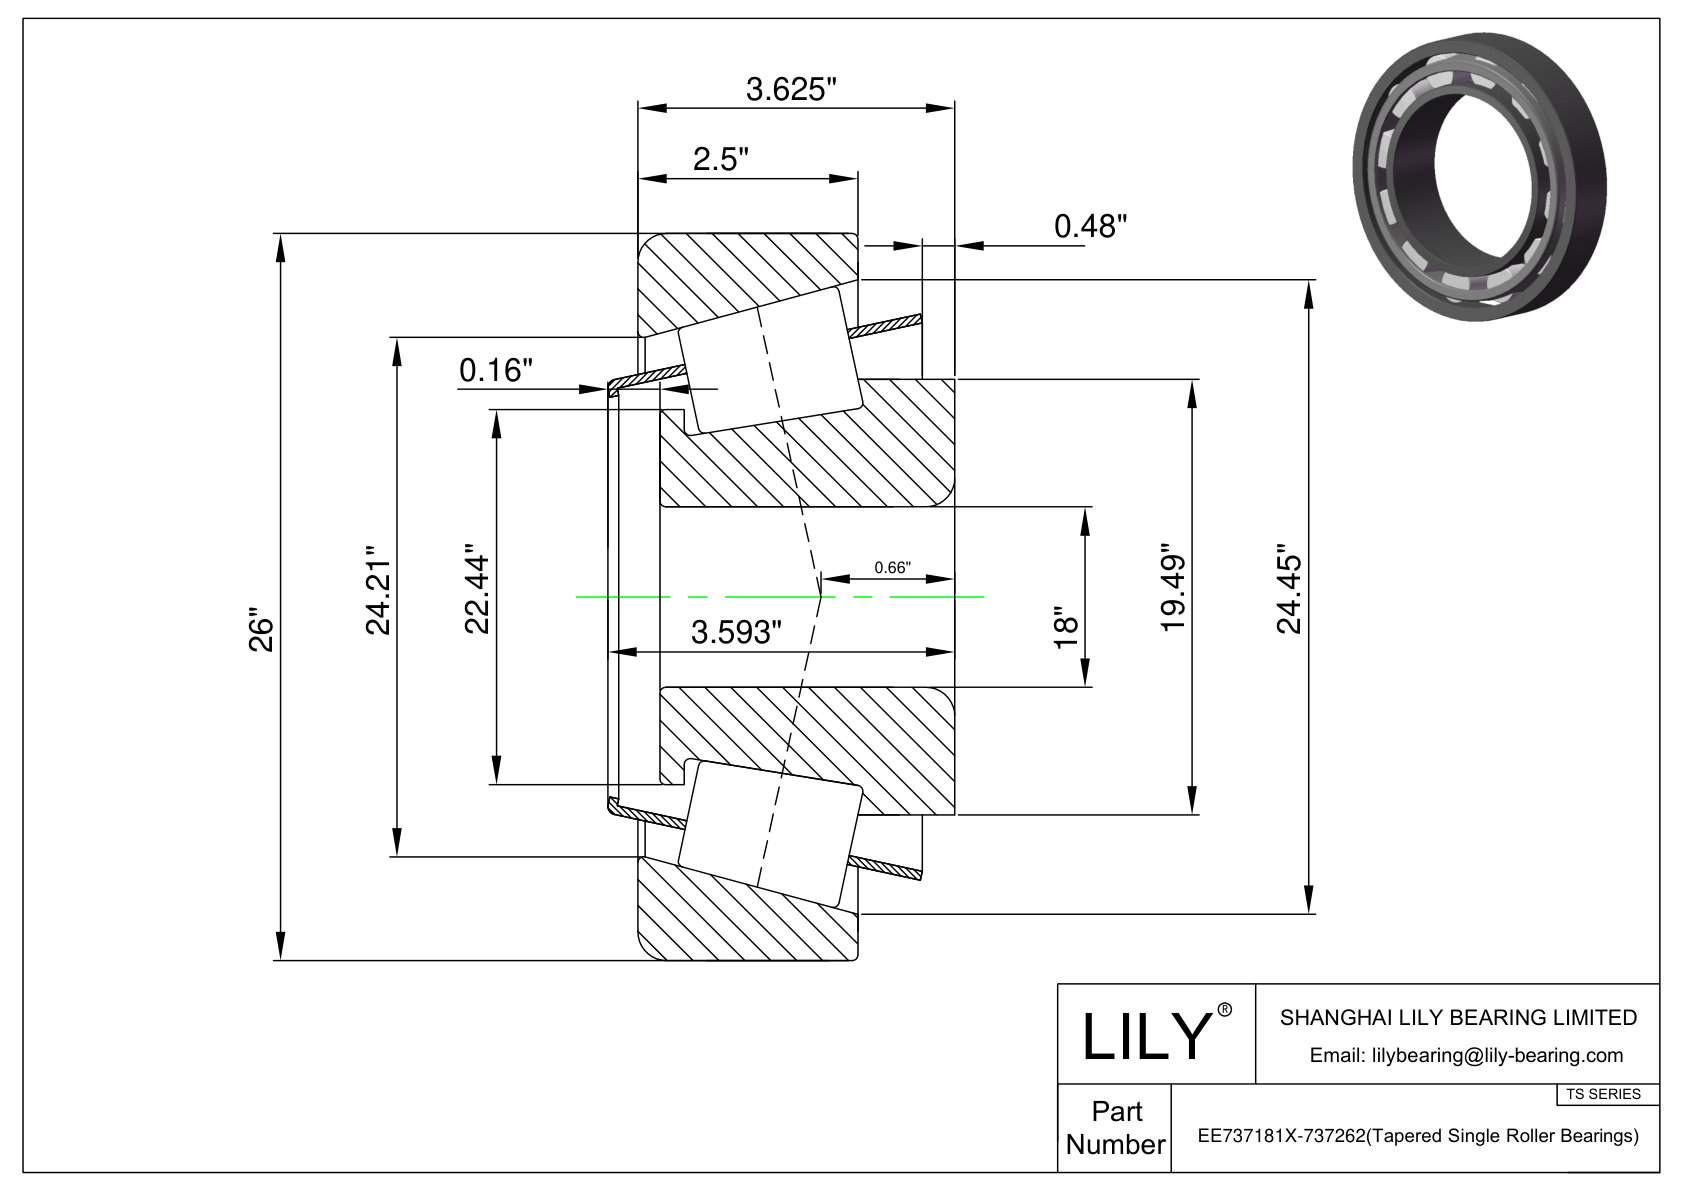 EE737181X-737262 TS (Tapered Single Roller Bearings) (Imperial) cad drawing